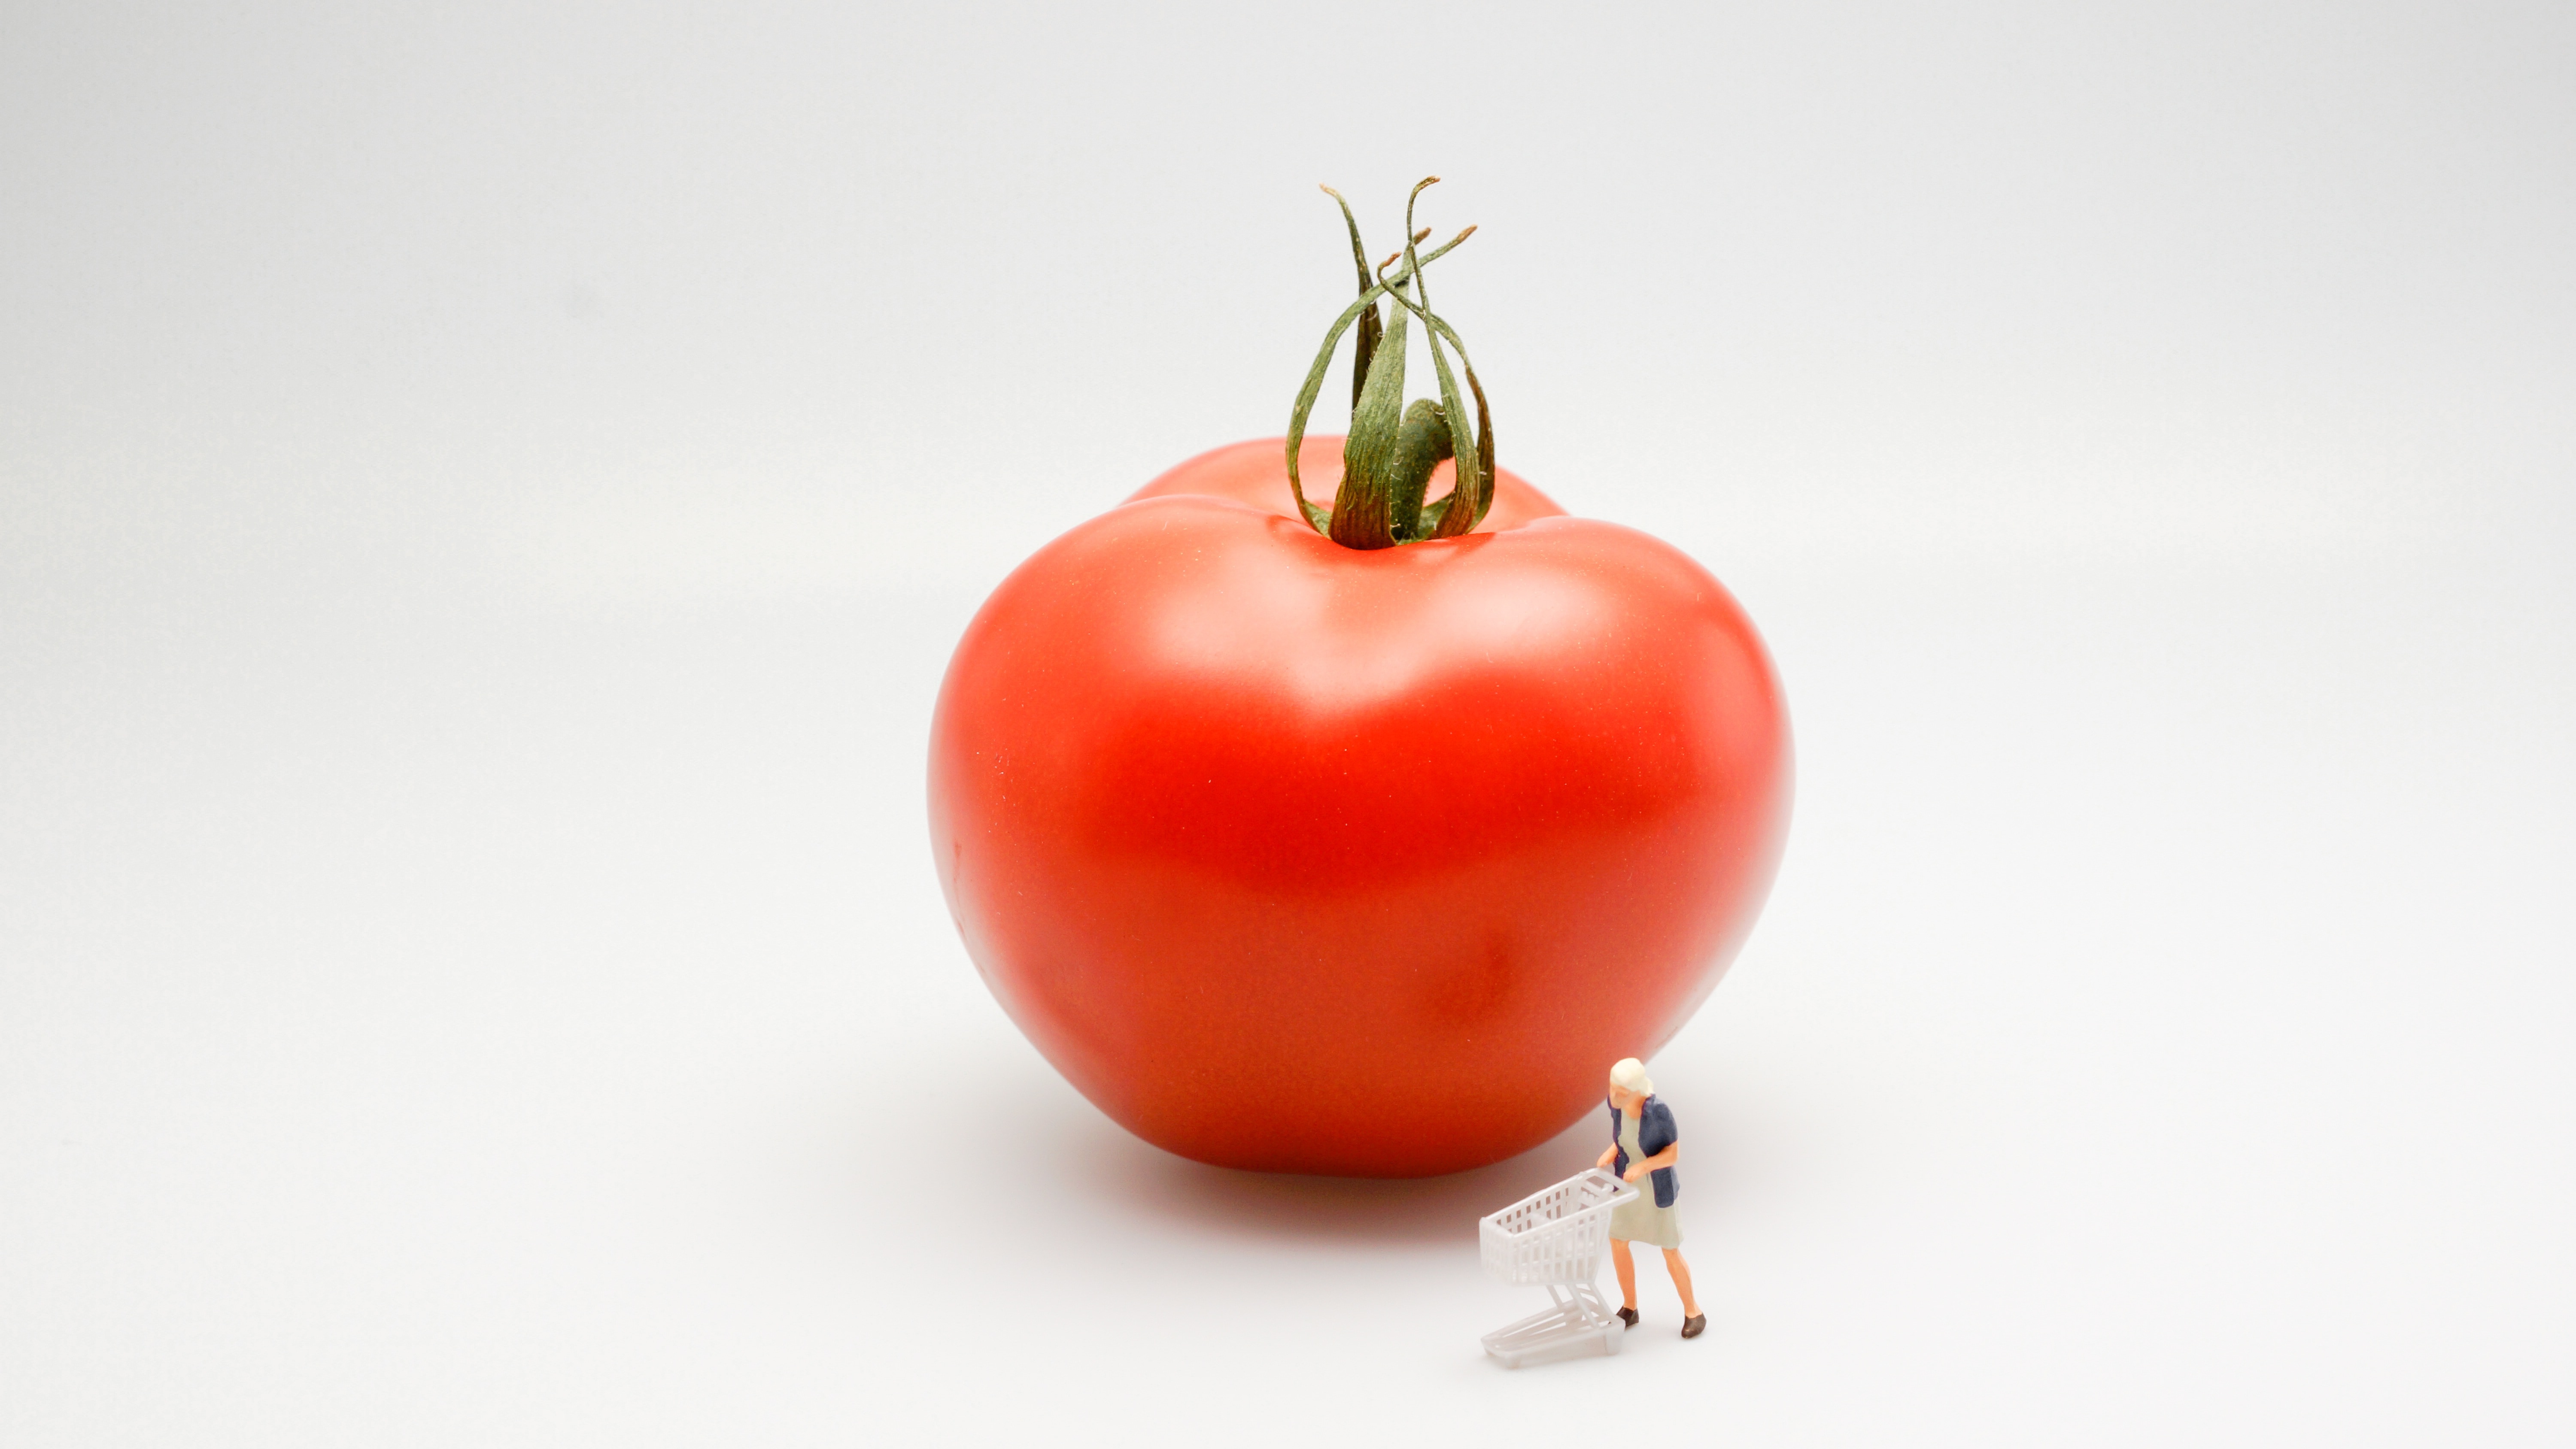 Tomato, Food, Vegetable, Red, Woman, studio shot, red